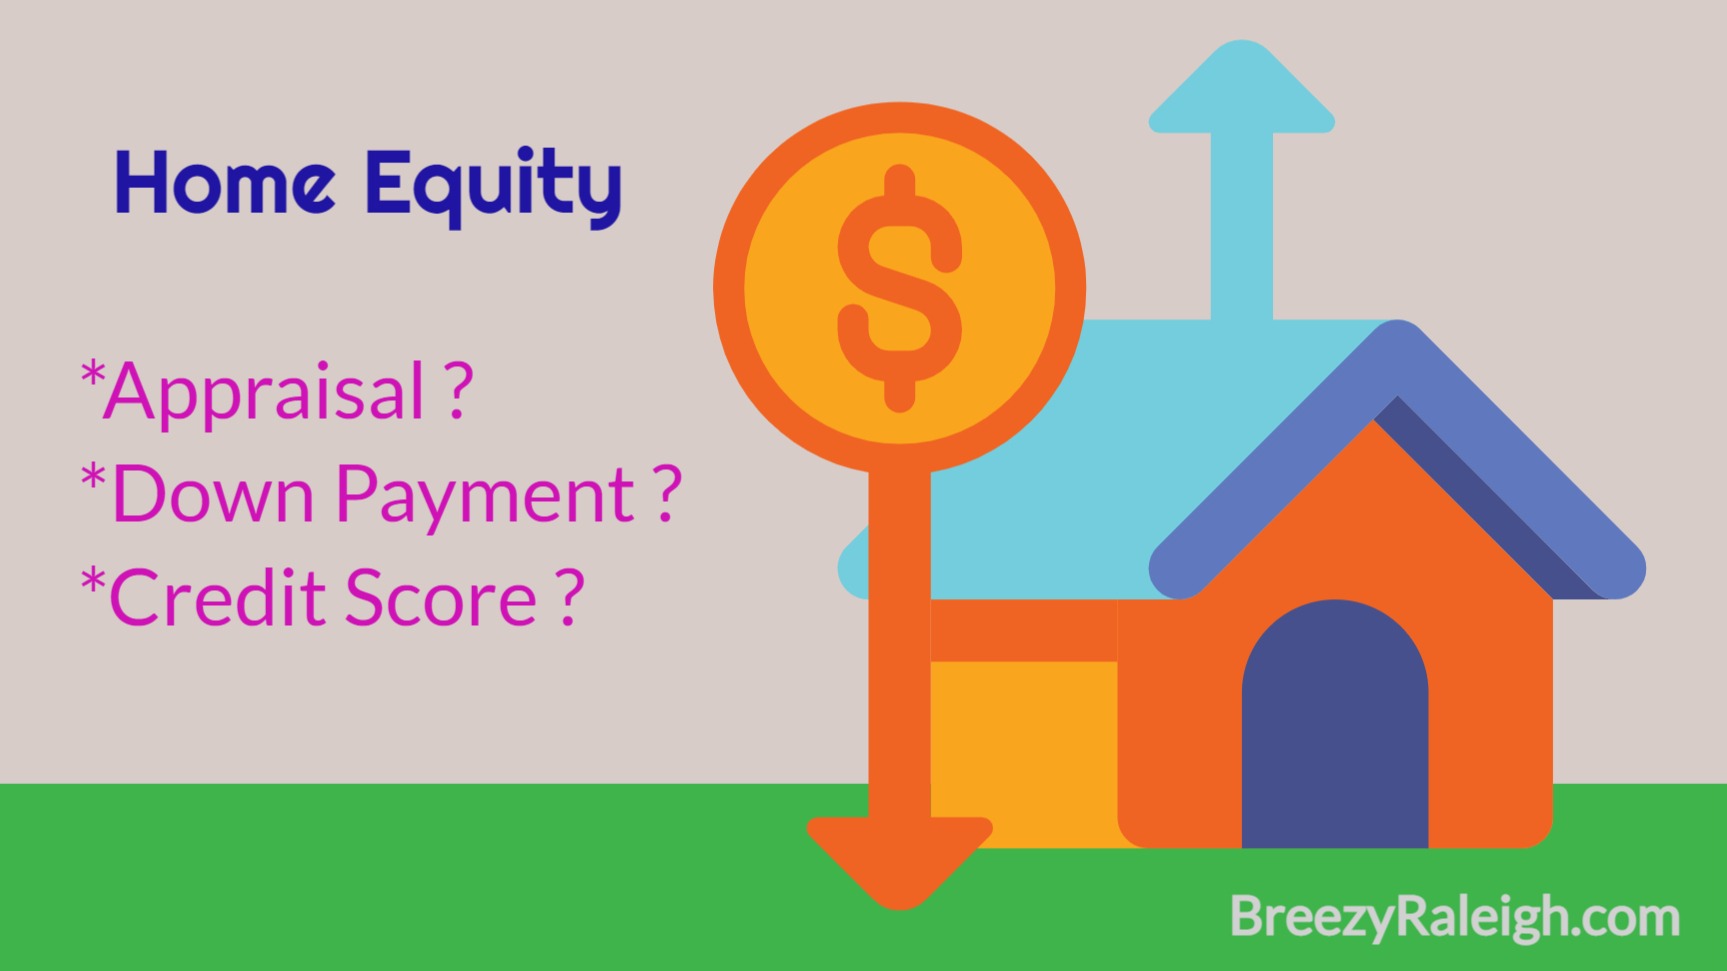 Home Equity graphic